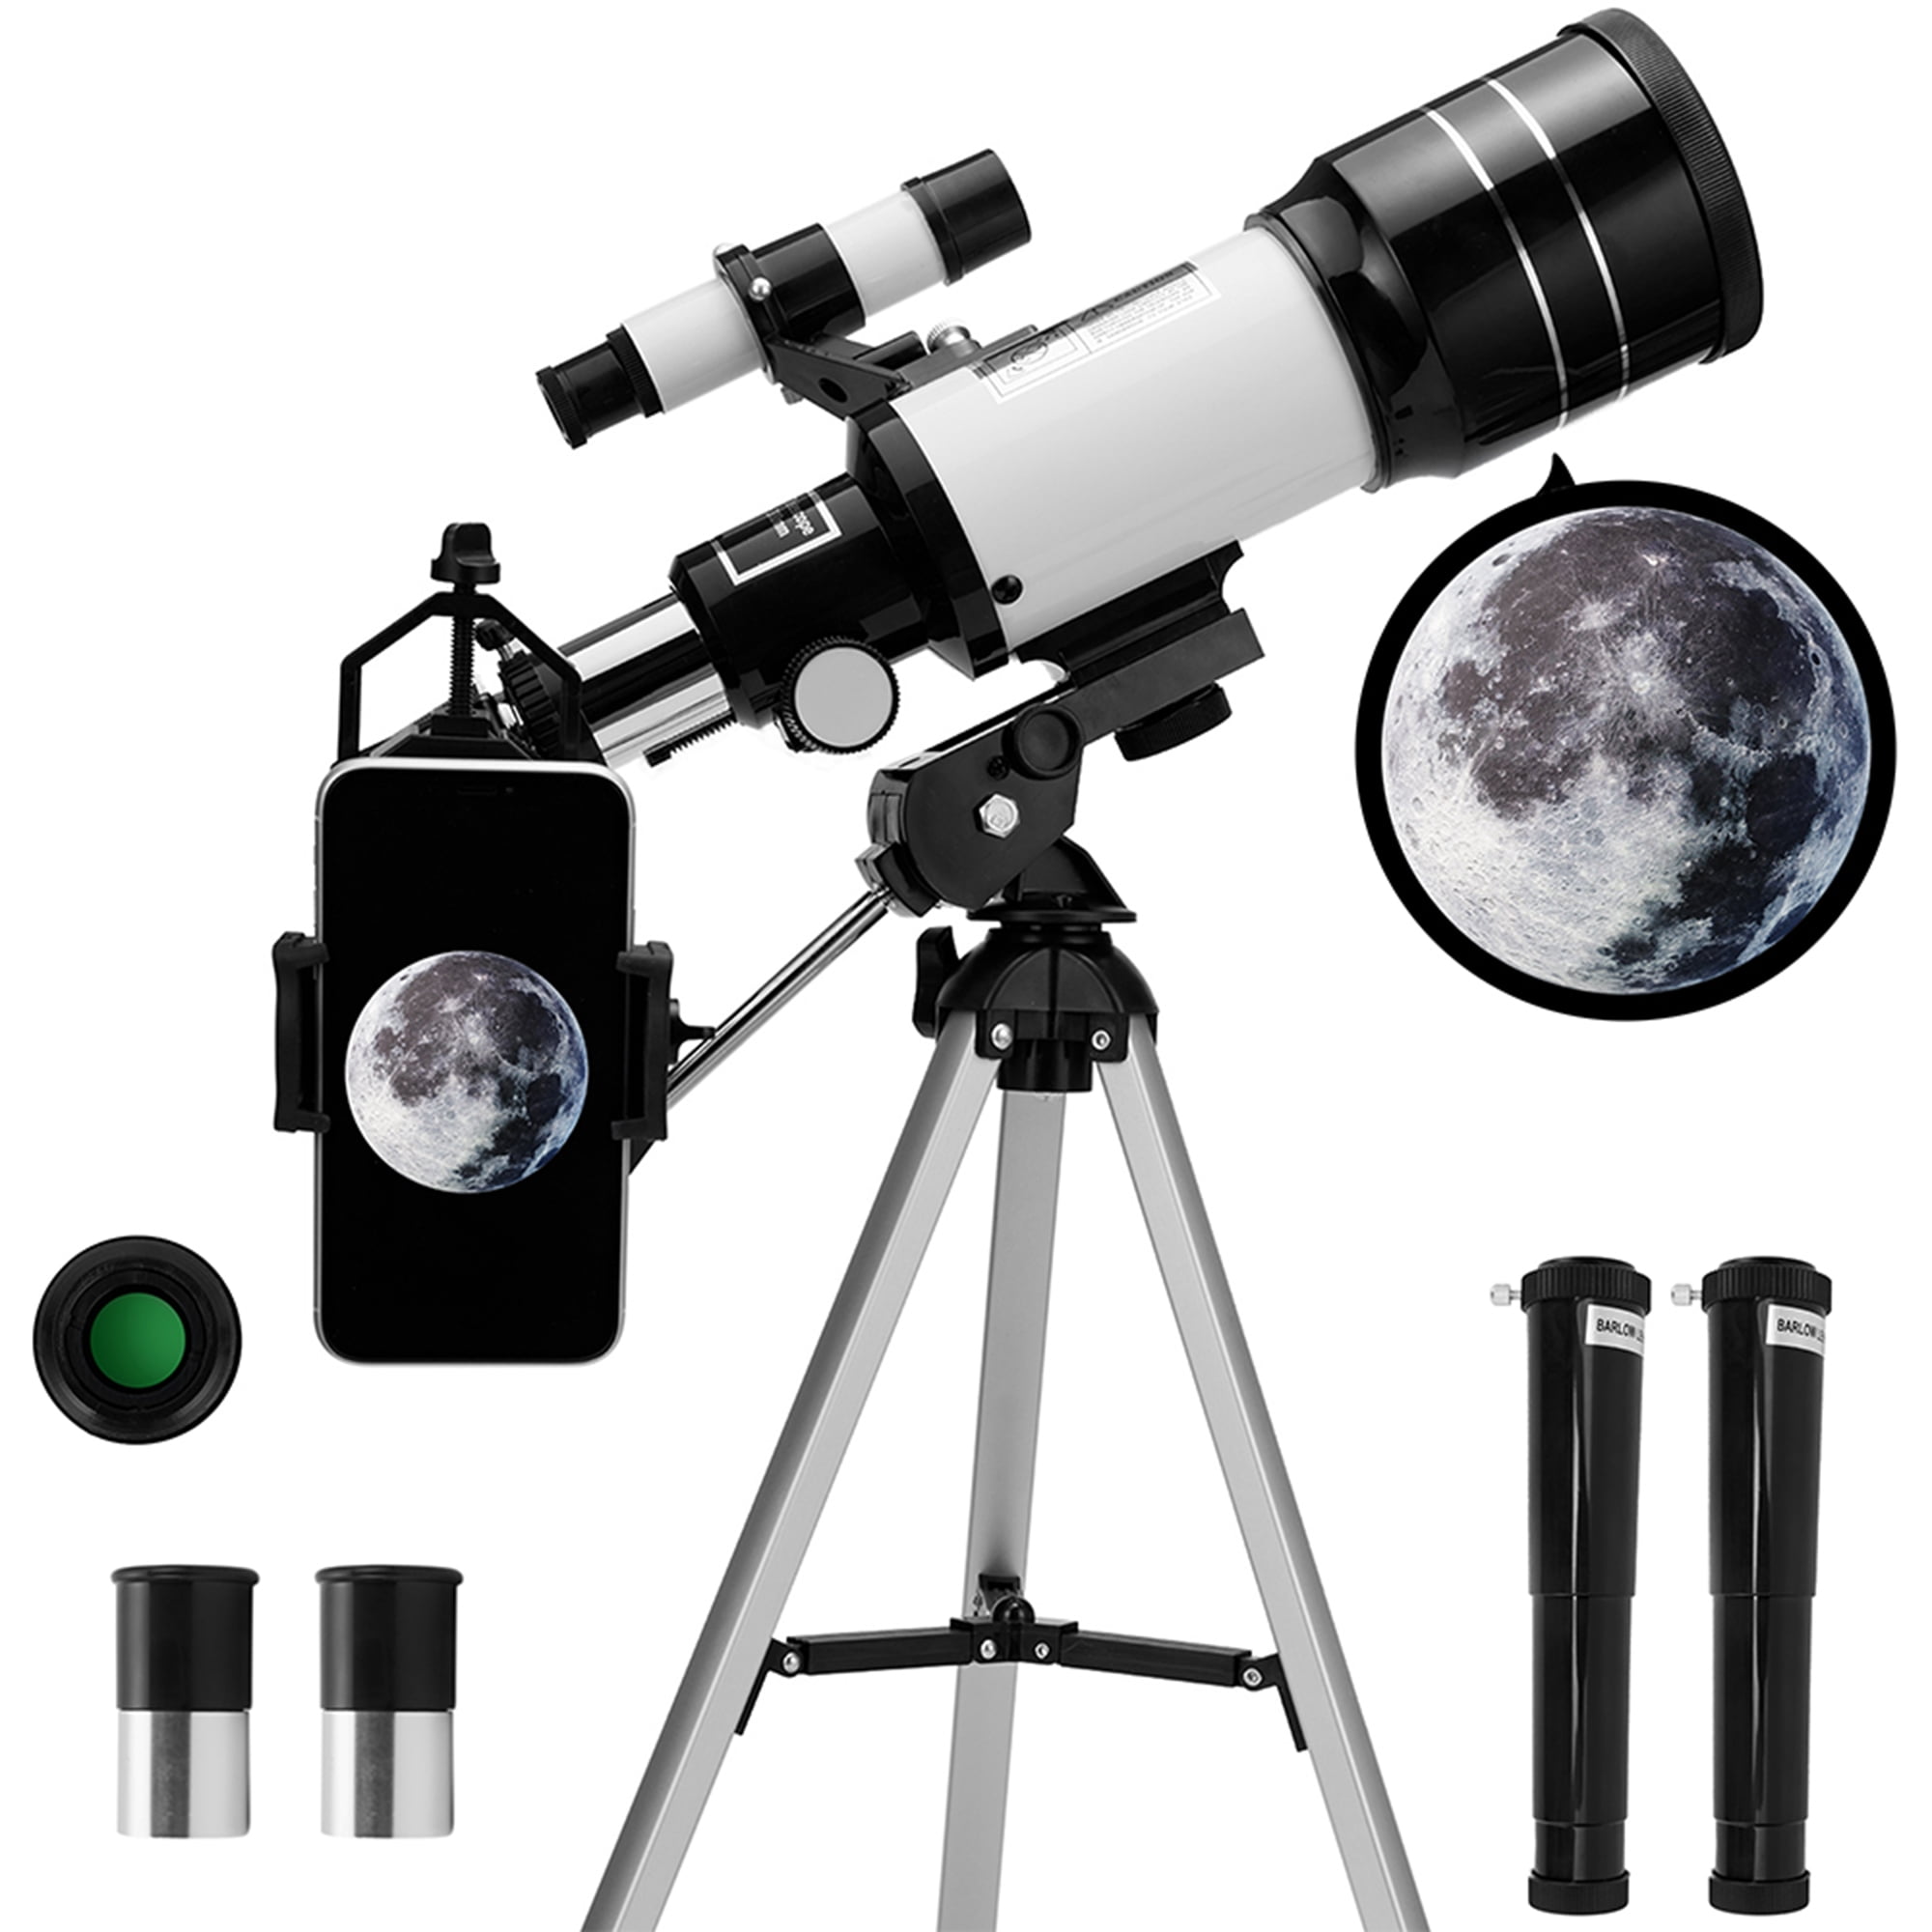 Astronomical Refractor Travel Telescope with Tripod Beginners Adults Moon Star Observation,Wide Telescope Astronomy for Adults Kids Beginners Owill 70mm Refractor Telescope for Astronomy Black 